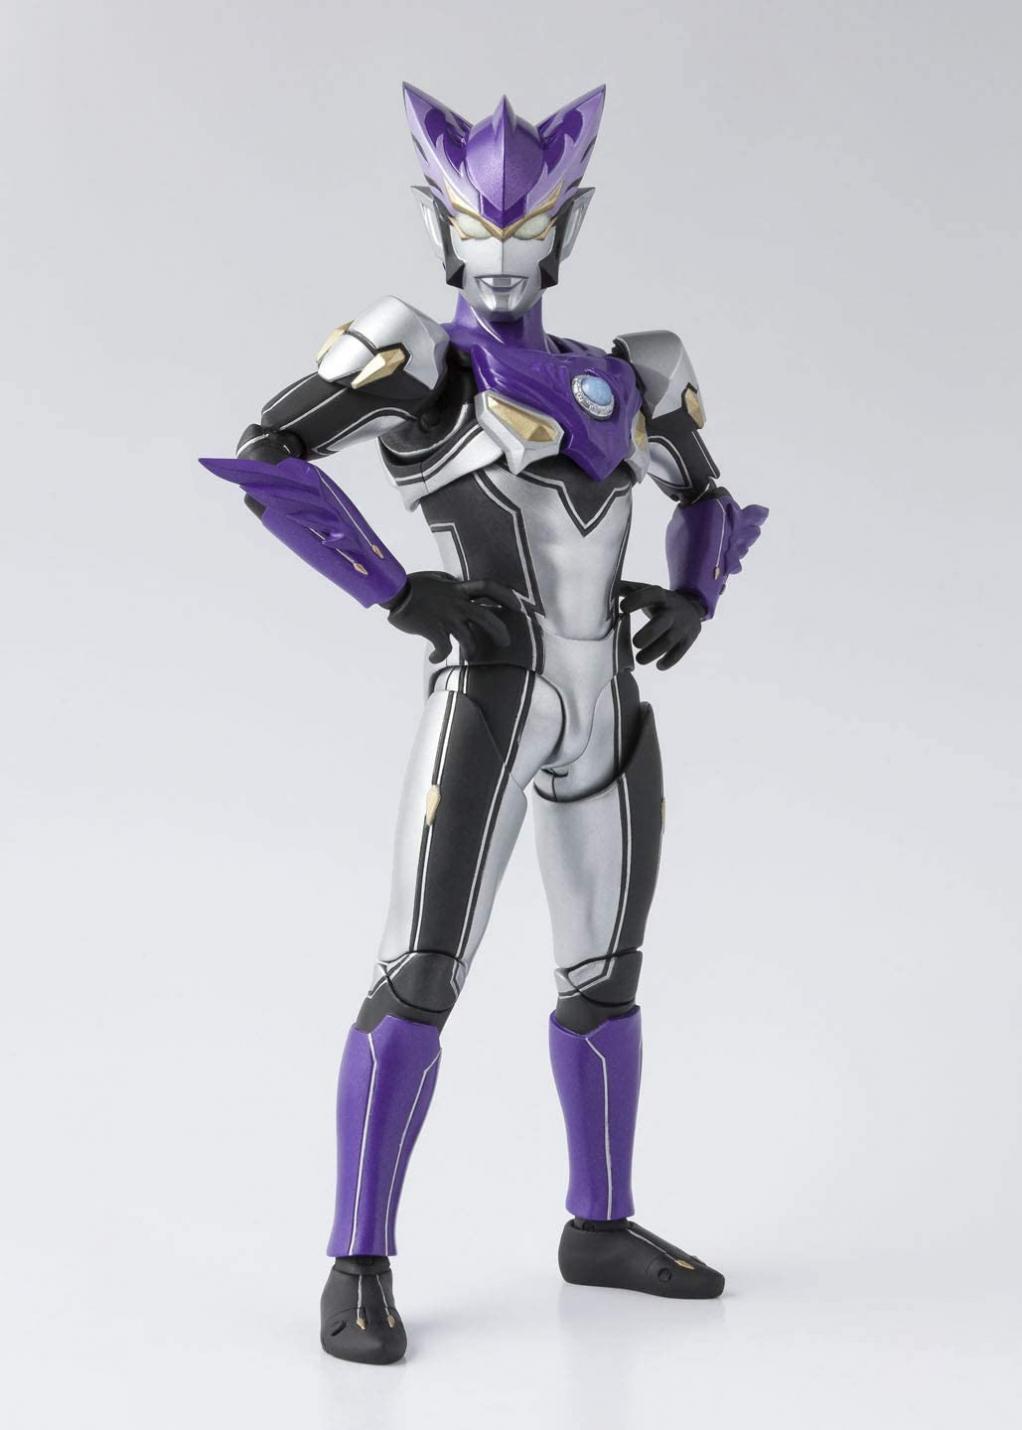 TAMASHII NATIONS Bandai S.H. Figuarts Ultraman Rosso Wind Action Figure